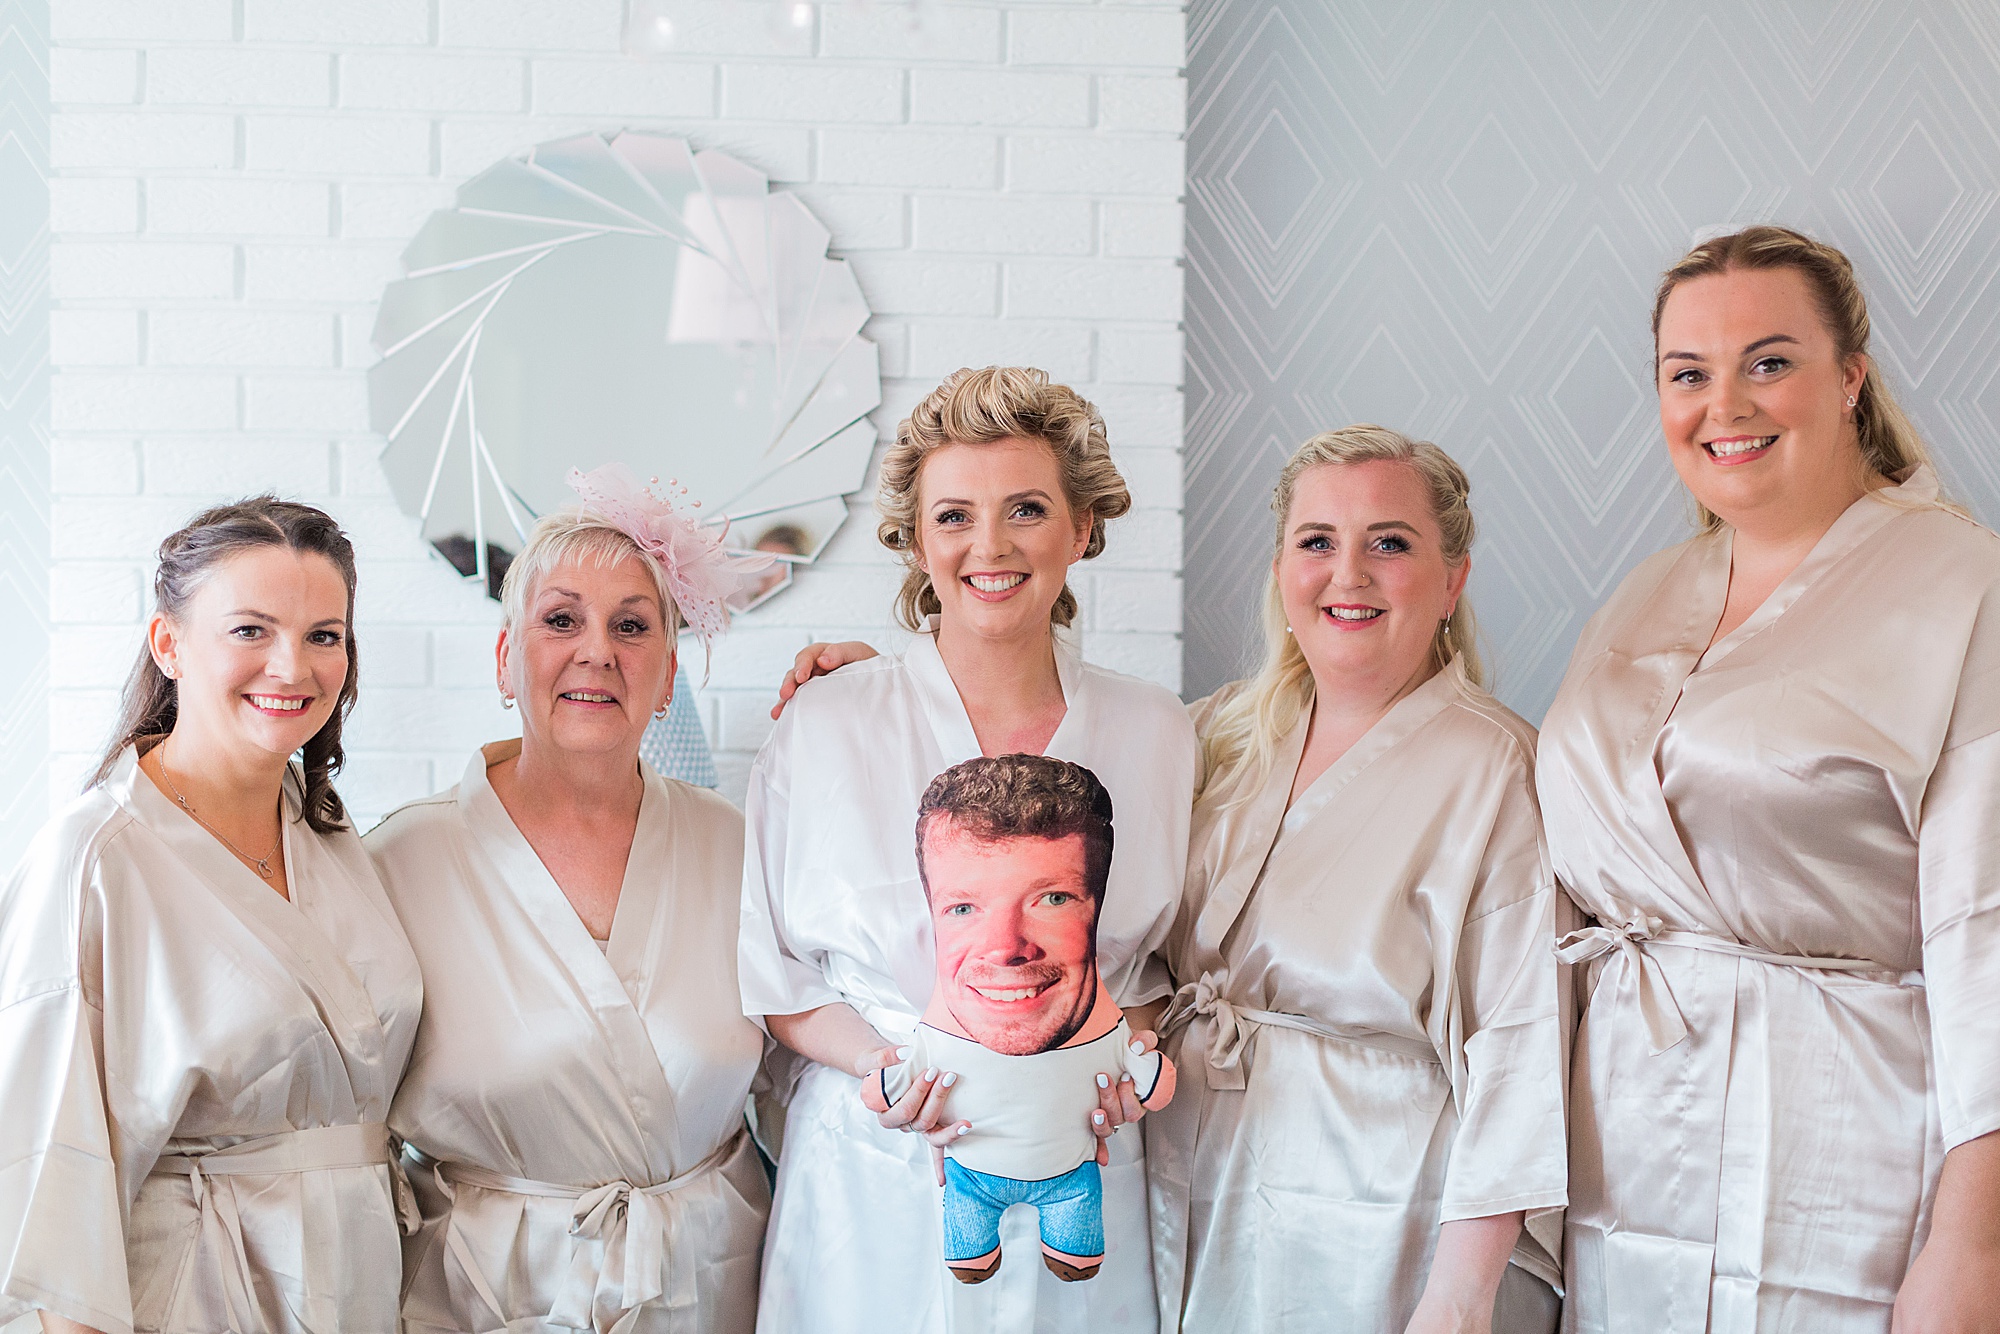 bride and bridesmaids in matching dressing gowns on the morning of the wedding holding a photo cushion of a husband who couldn't be at the wedding. All girls smiling with hair and makeup preparations underway 